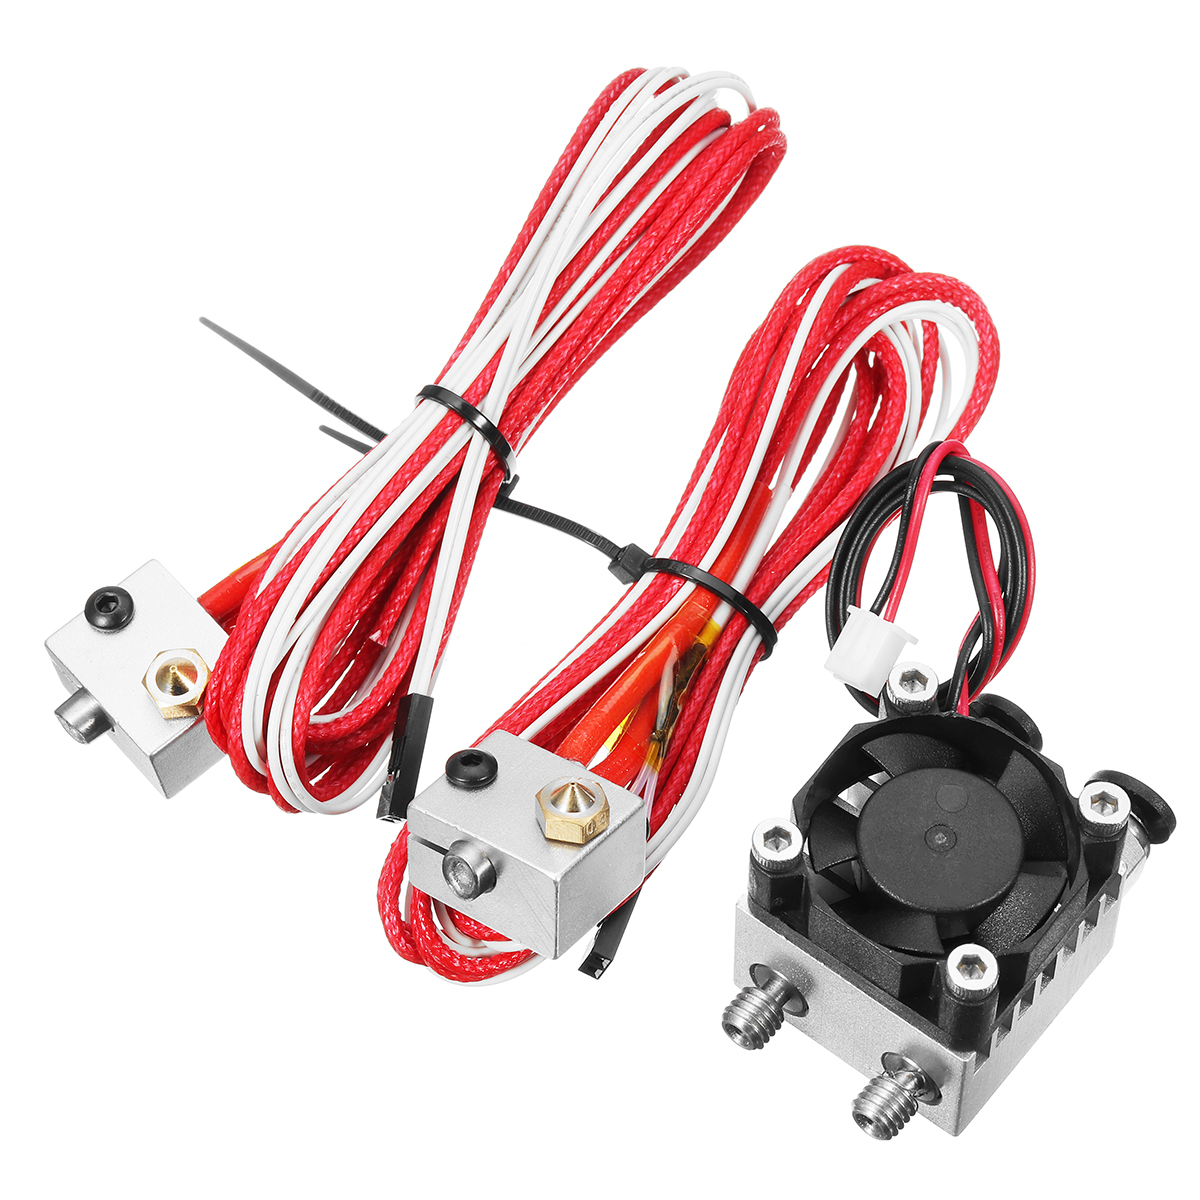 1.75mm/3.0mm Fialment 0.4mm Nozzle Upgraded Dual Head Extruder Kit for 3D Printer 20